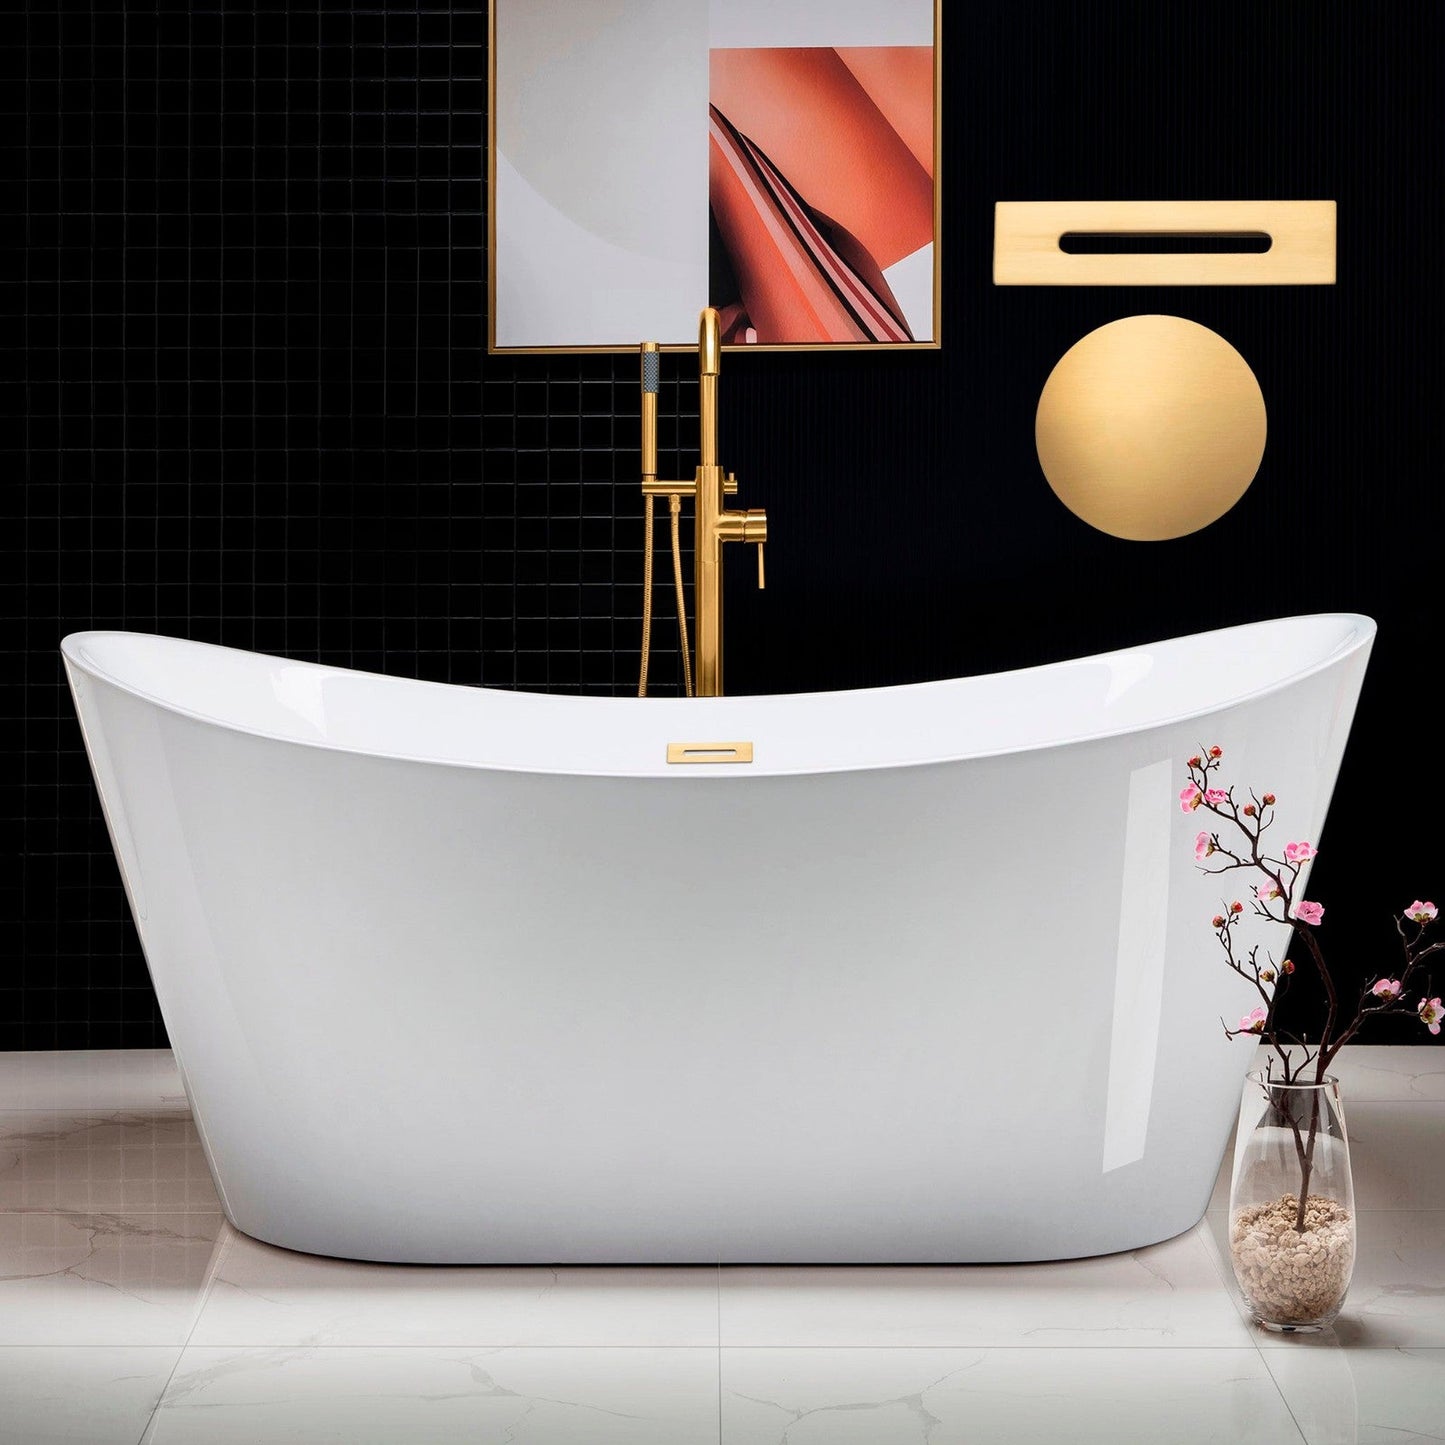 WoodBridge B0010 67" White Acrylic Freestanding Contemporary Soaking Bathtub With Brushed Gold Drain, Overflow, F0073BGVT Tub Filler and Caddy Tray